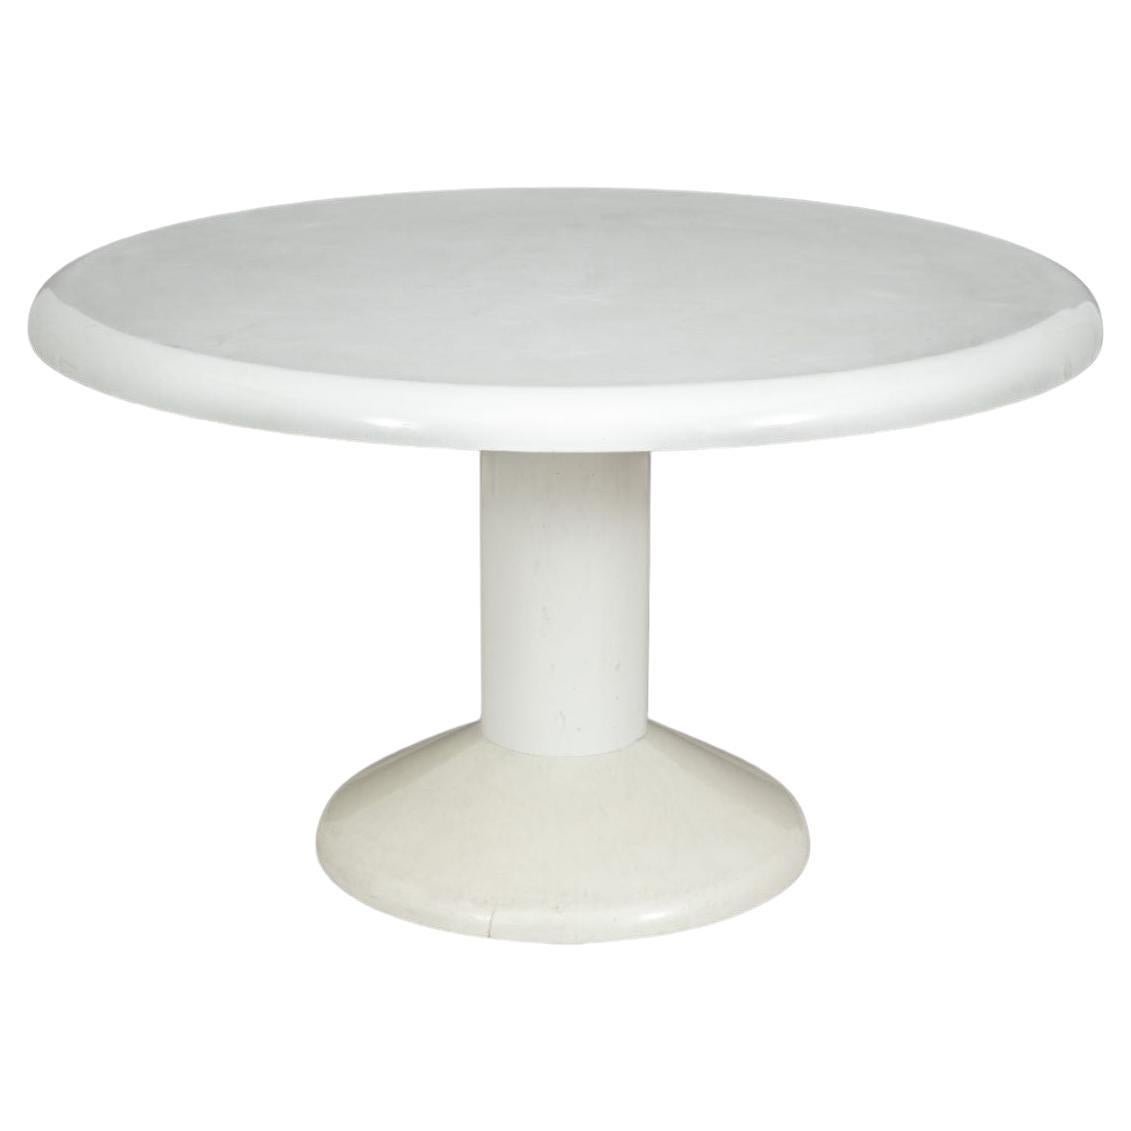 Vico Magistretti for Artemide Dining Table, 1970s For Sale